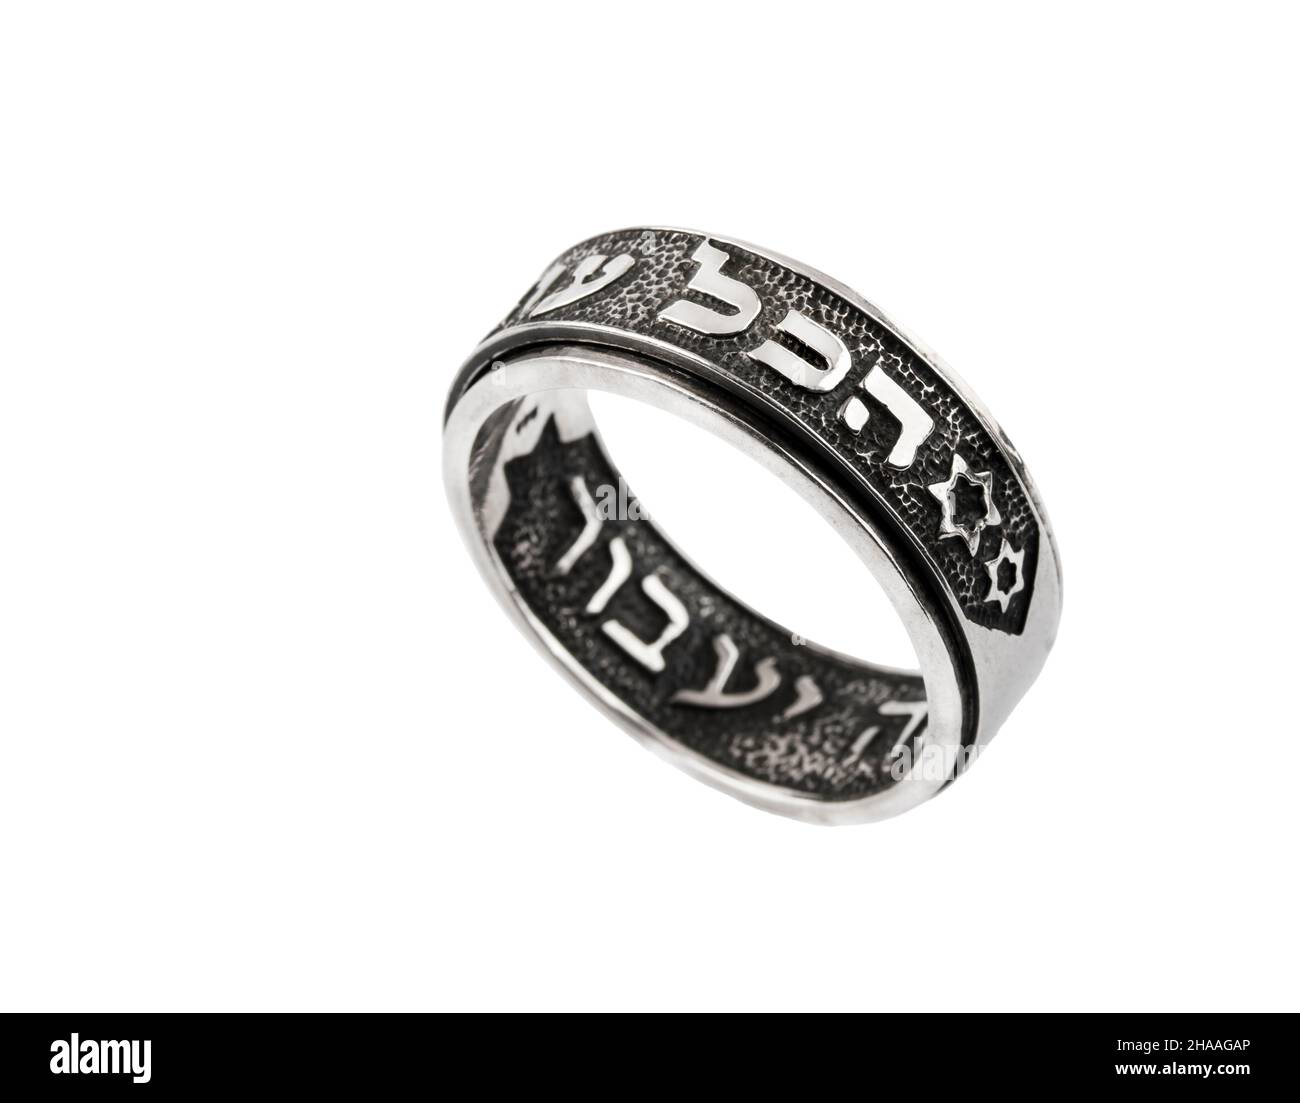 king solomons kabbalah ring this too shall pass hebrew isolated on white background 2HAAGAP